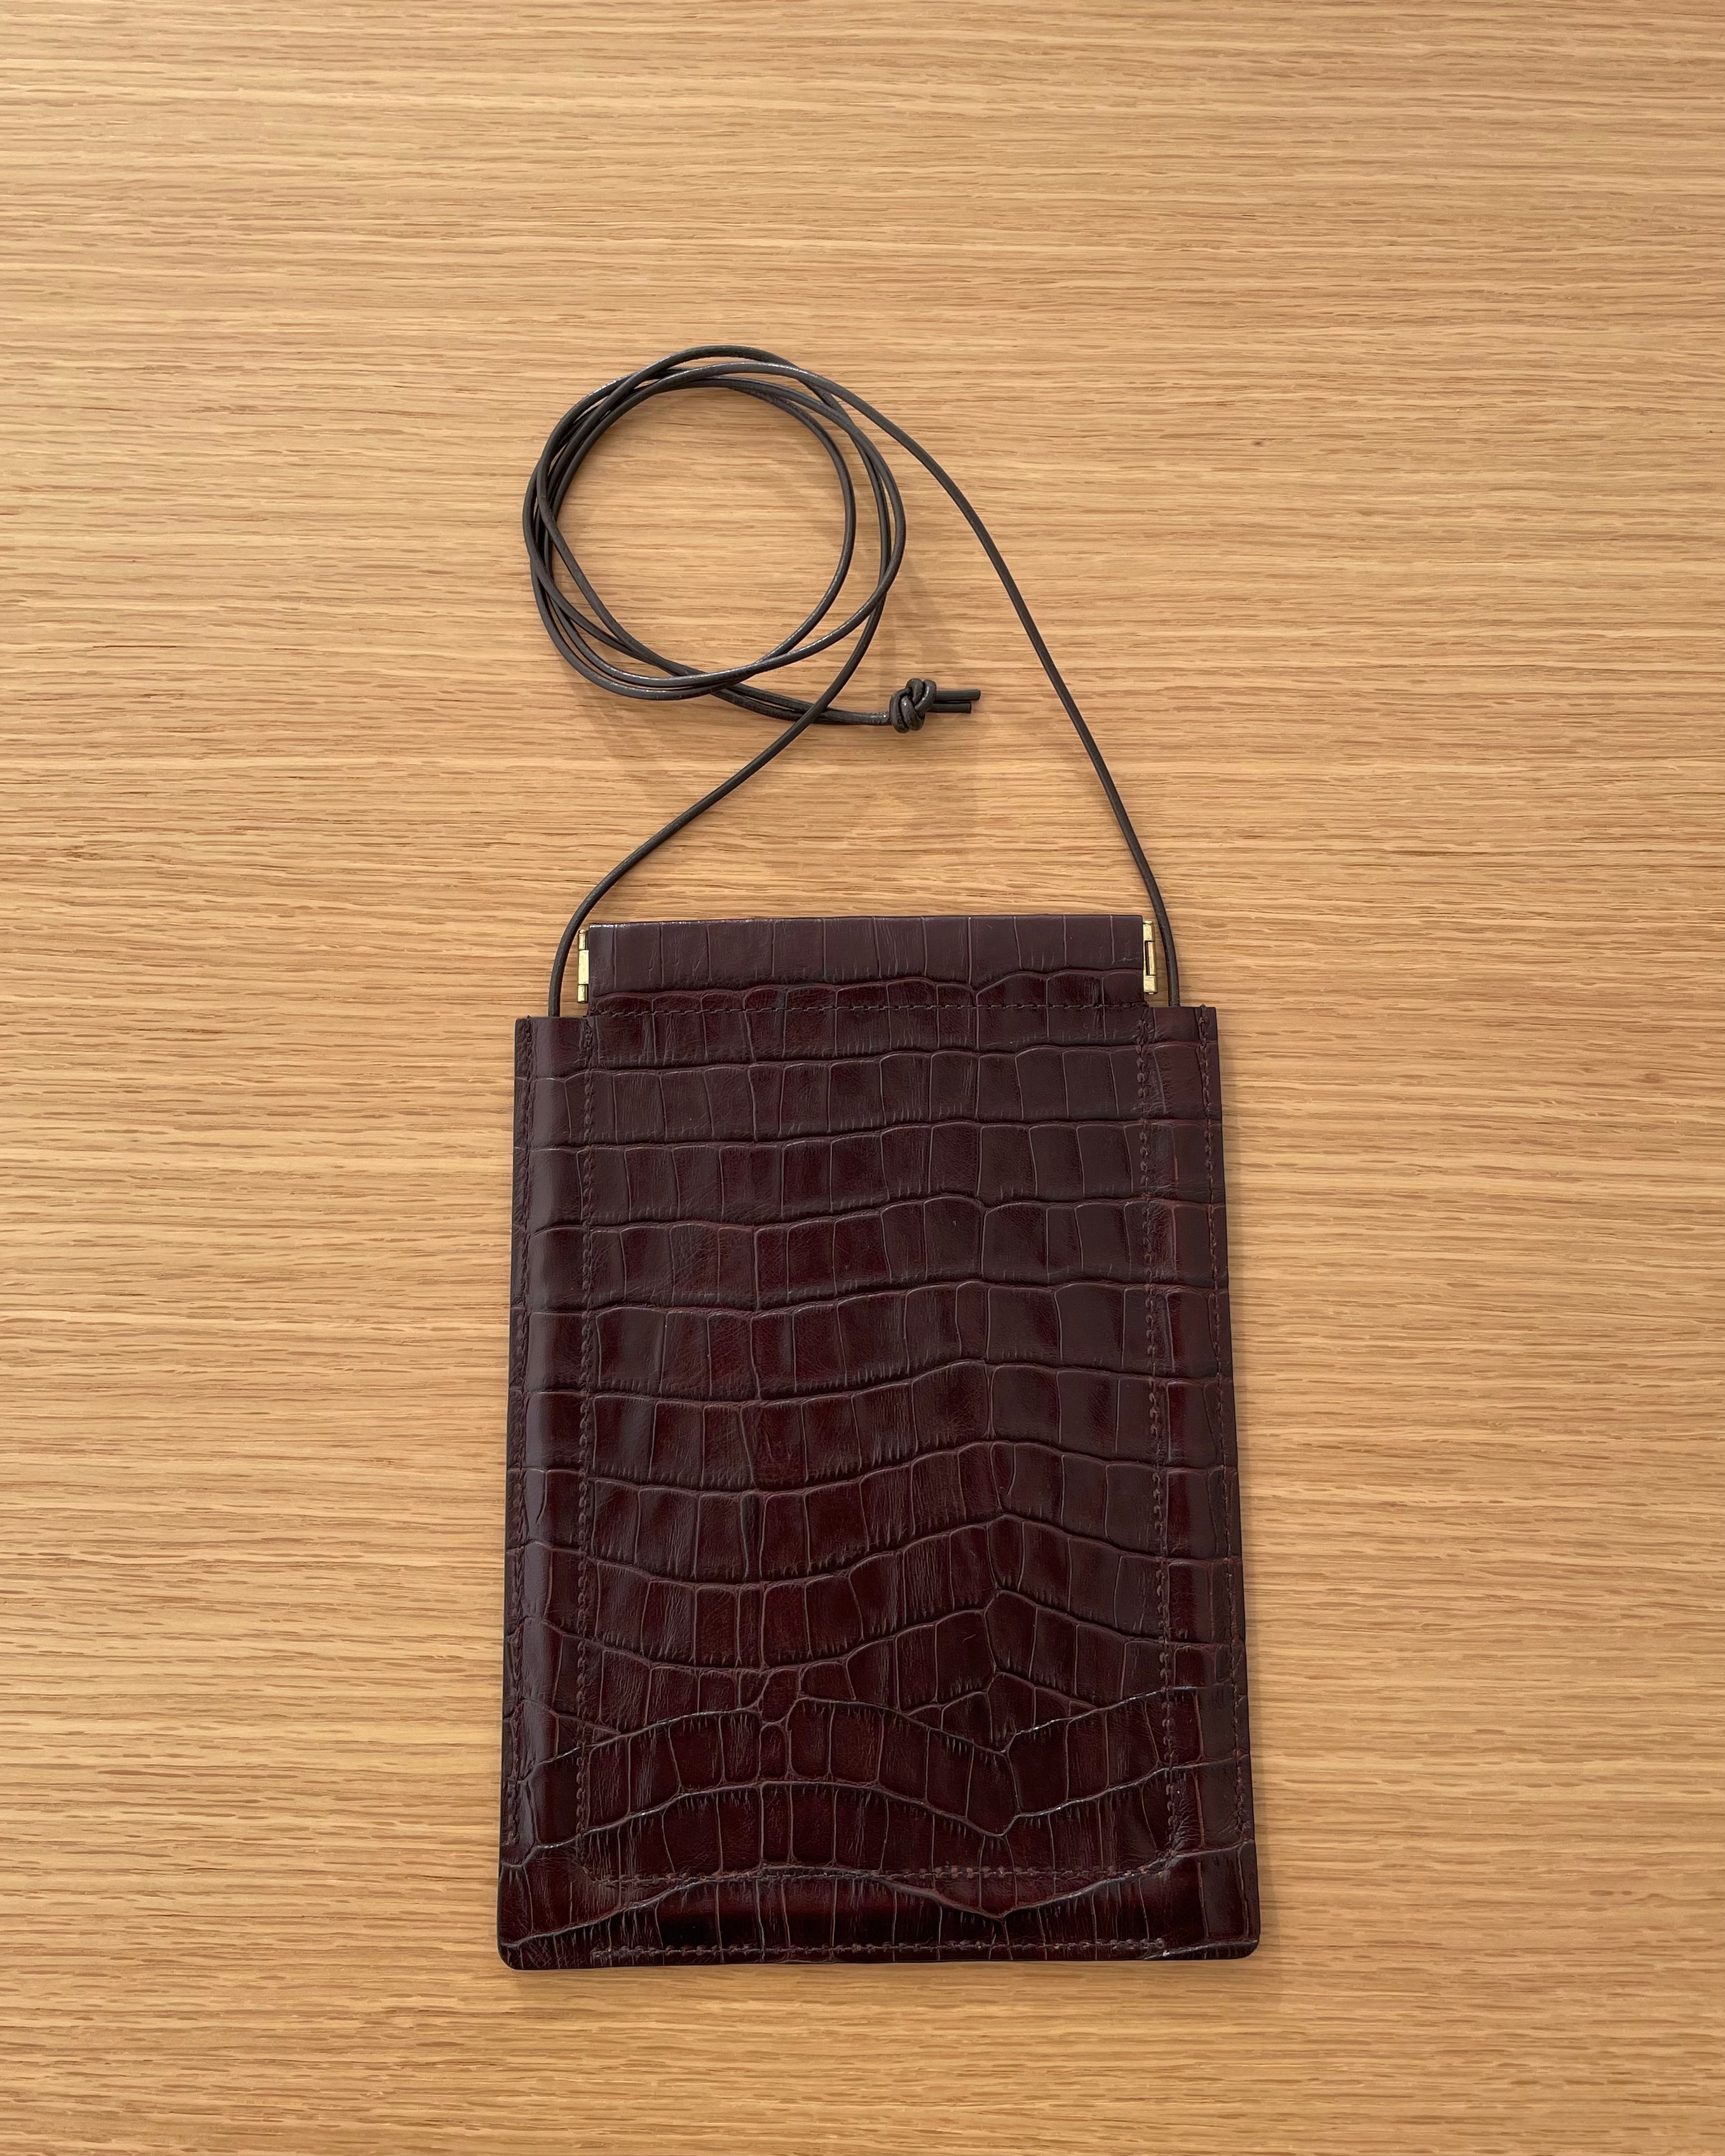 Clasp Bag in Choco